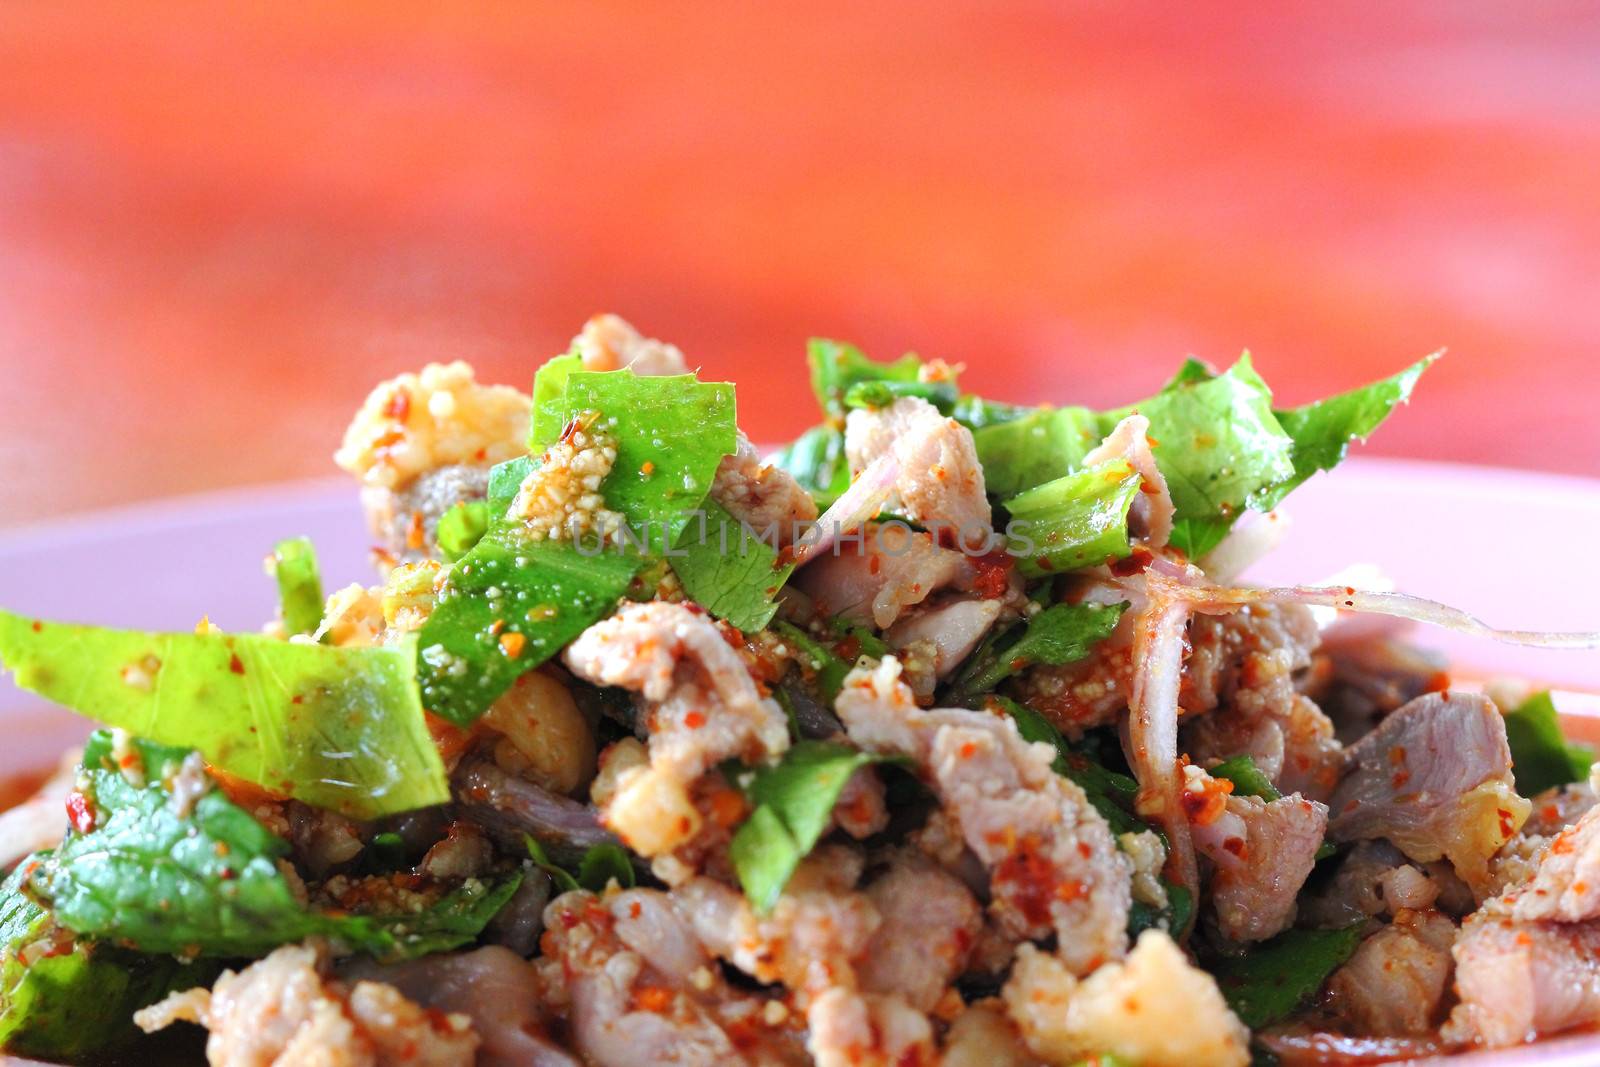 Spicy minced duck salad with green vegetables and chillies